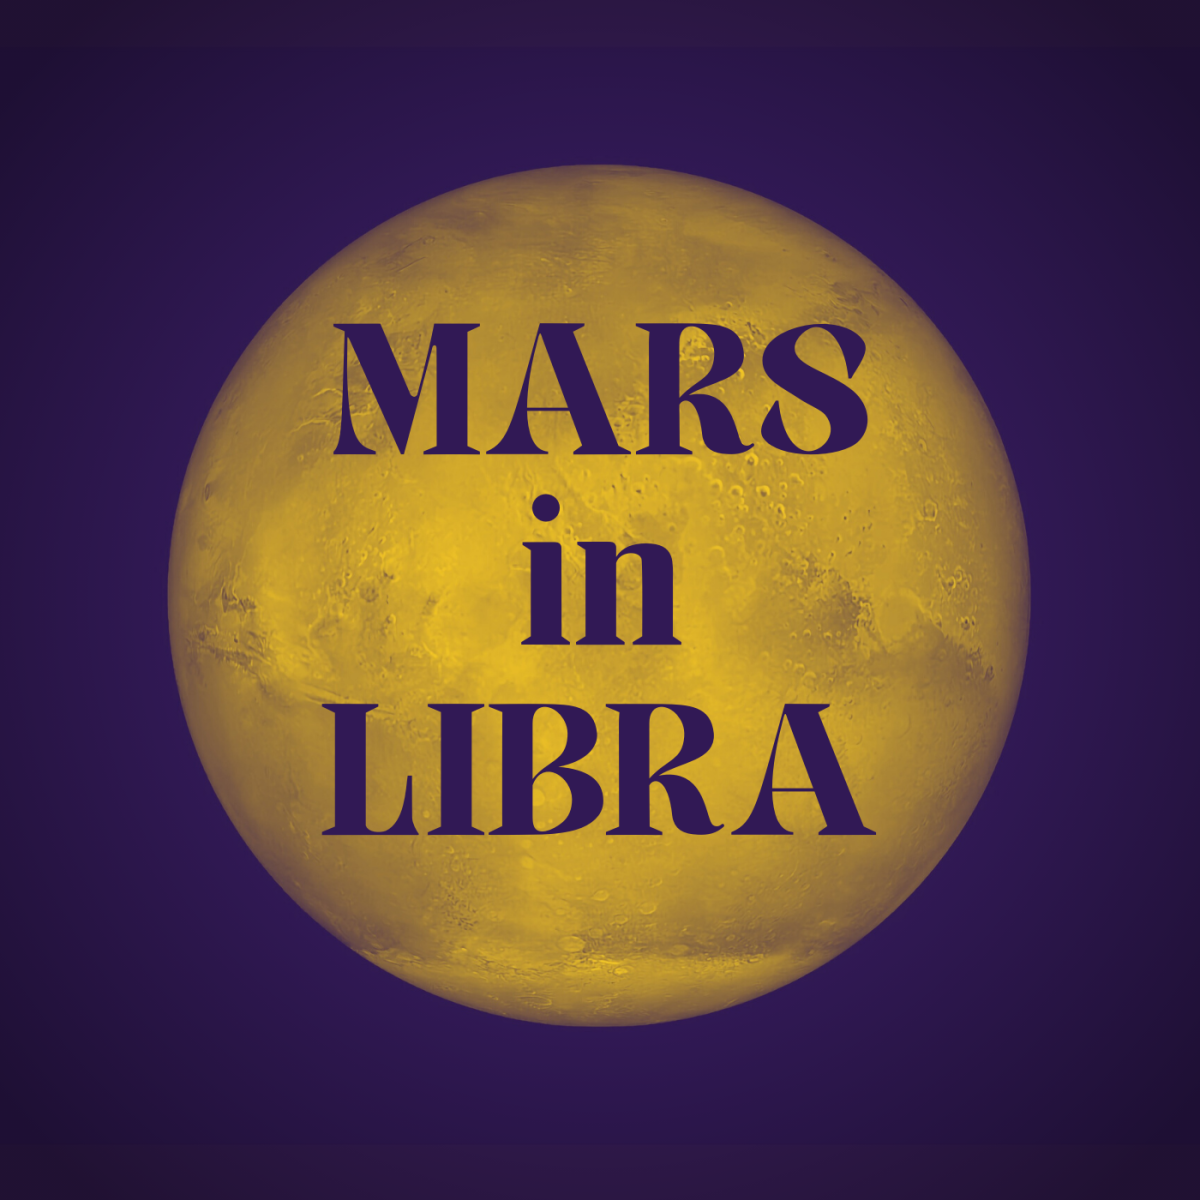 What does it mean to have Mars in Libra?